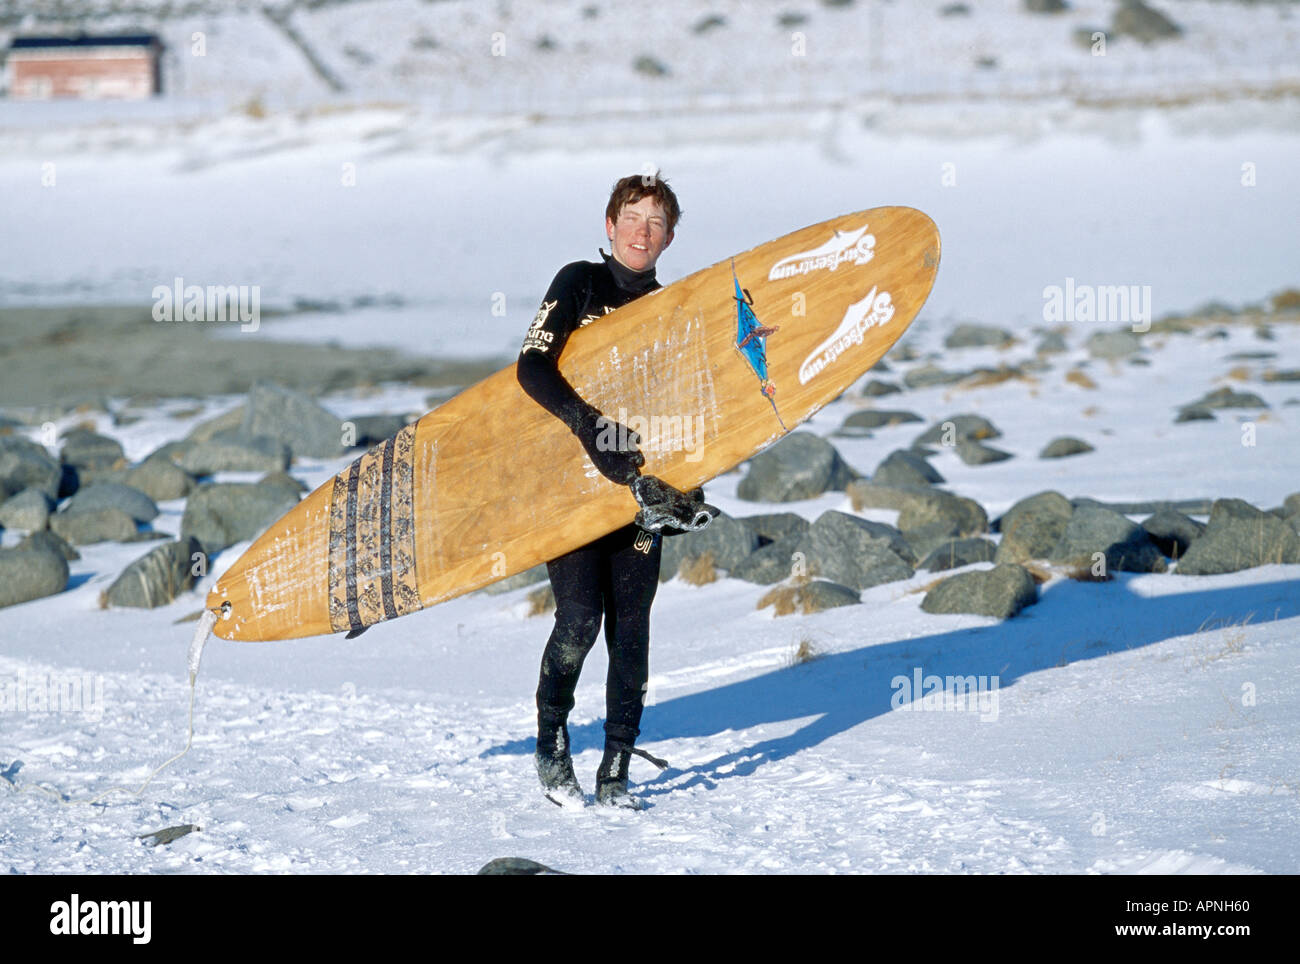 SHAUN WHITE ON BEACH WITH SURFBOARD IN SNOW, NORVÈGE Banque D'Images